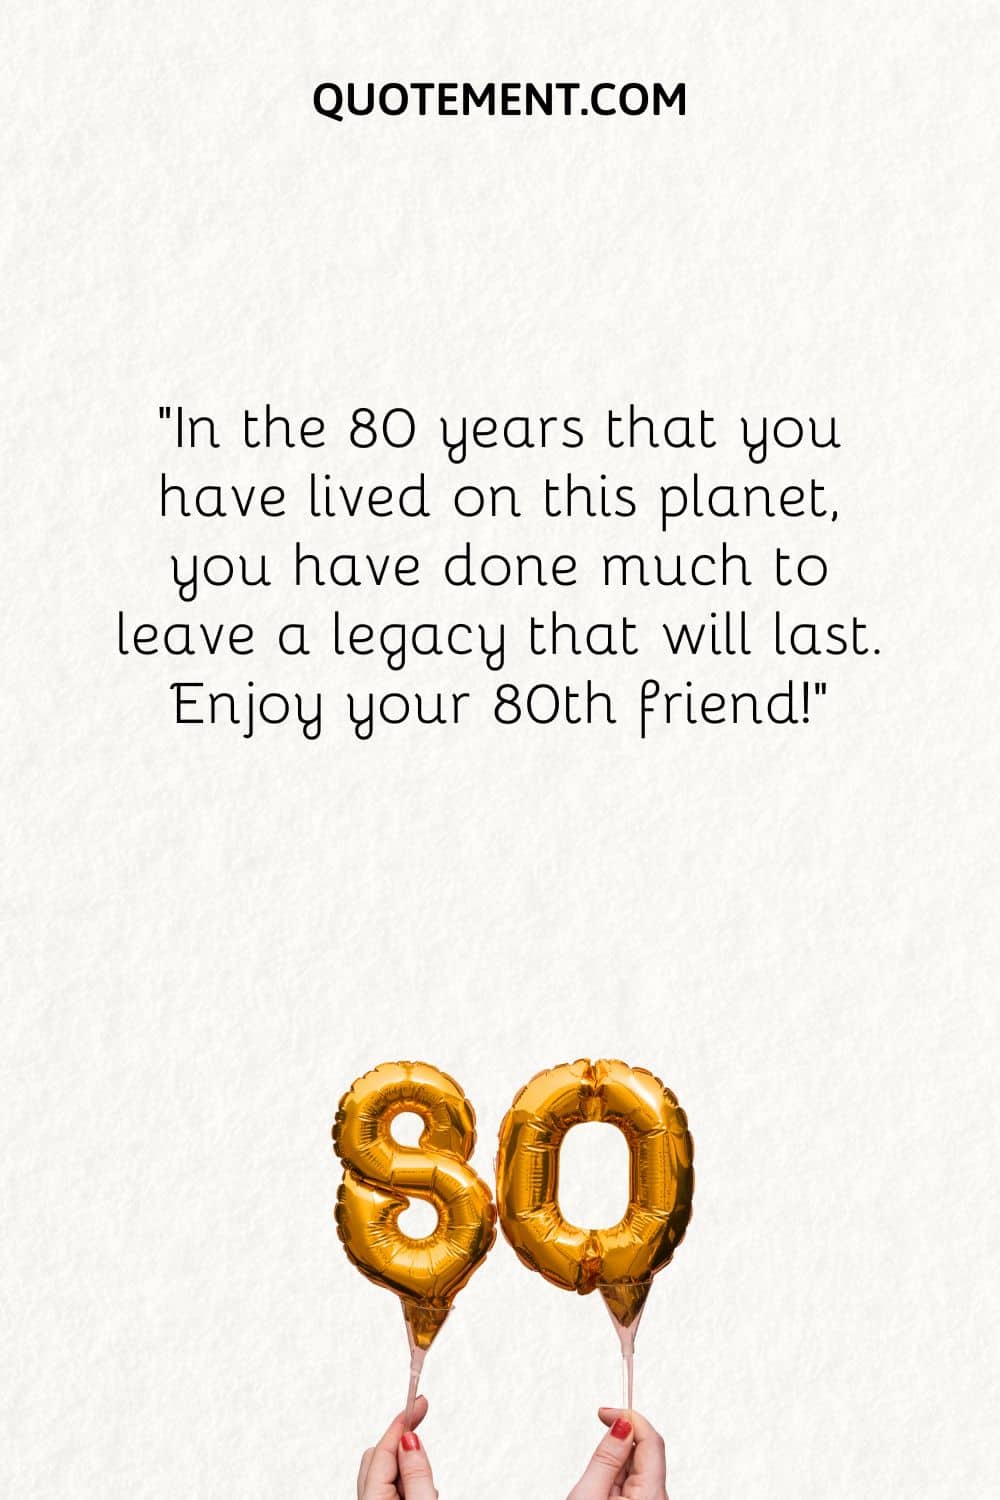 In the 80 years that you have lived on this planet, you have done much to leave a legacy that will last. Enjoy your 80th friend